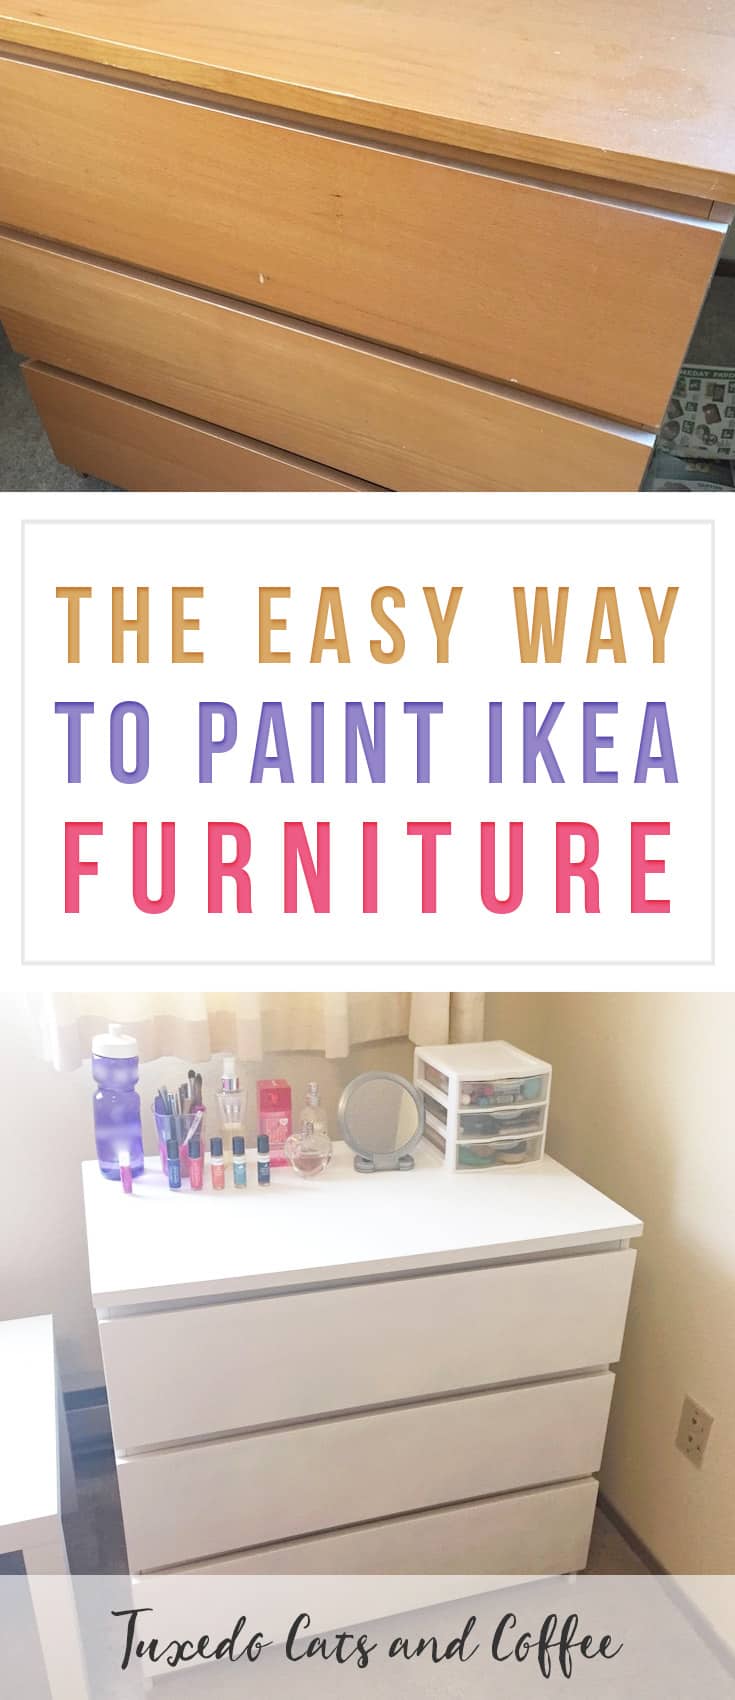 The Easy Way to Paint Ikea Furniture